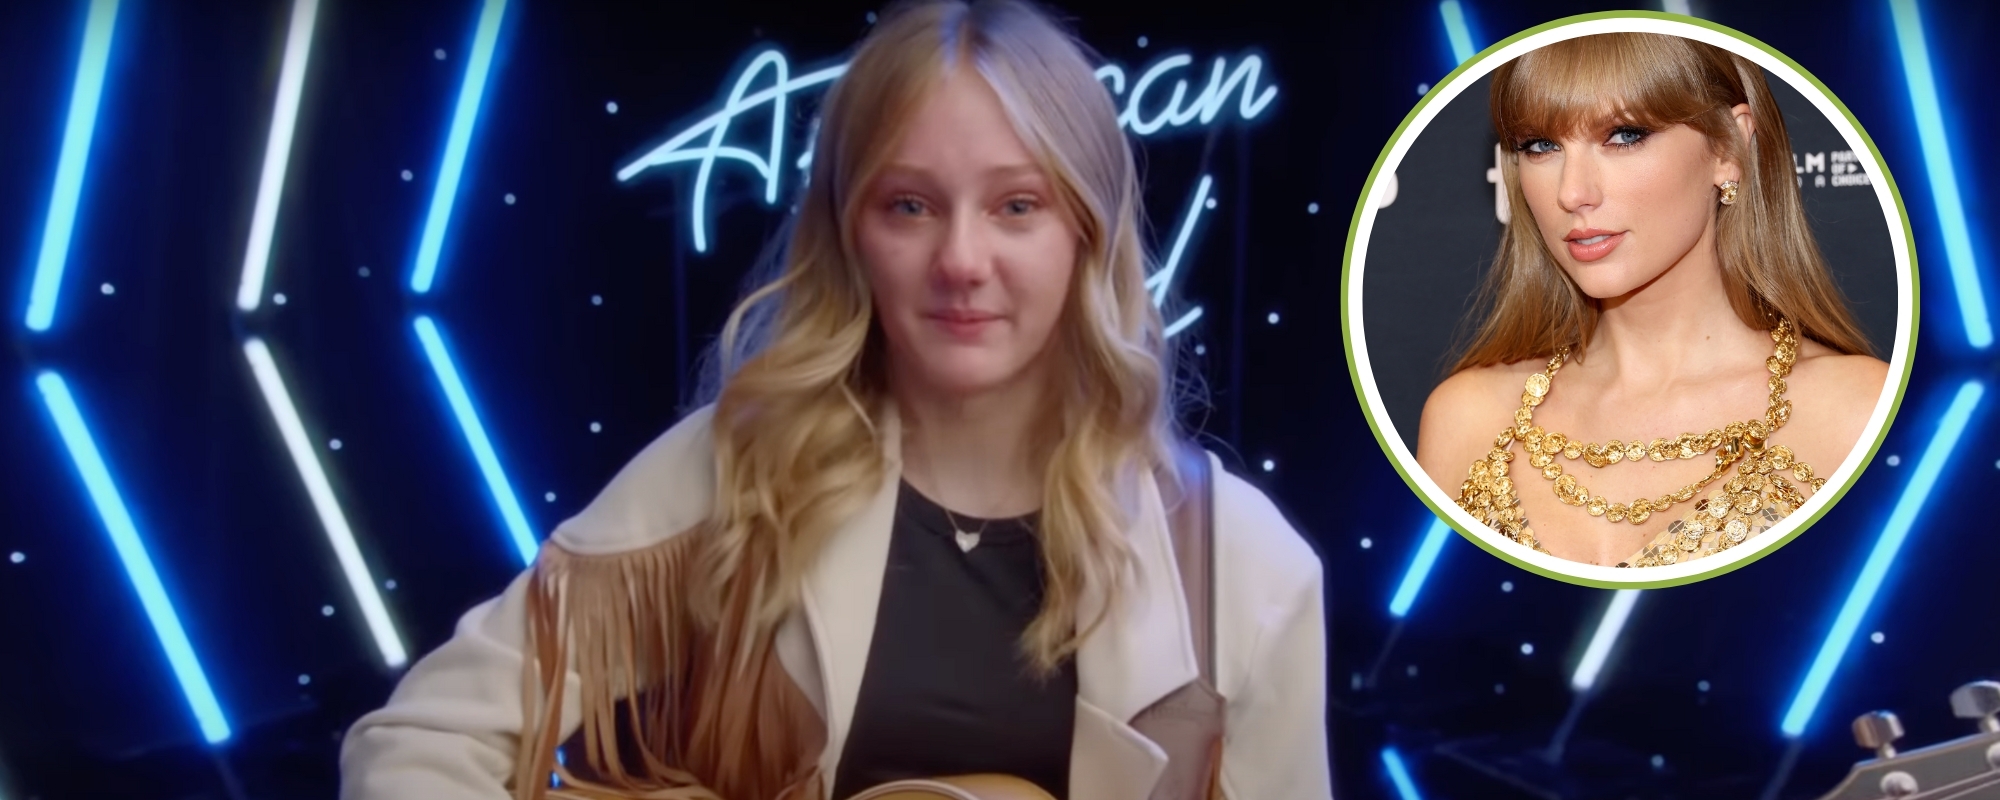 ‘American Idol’ Fans Anoint 15-Year-Old “The New Taylor Swift”—But Judges Say No to Hollywood